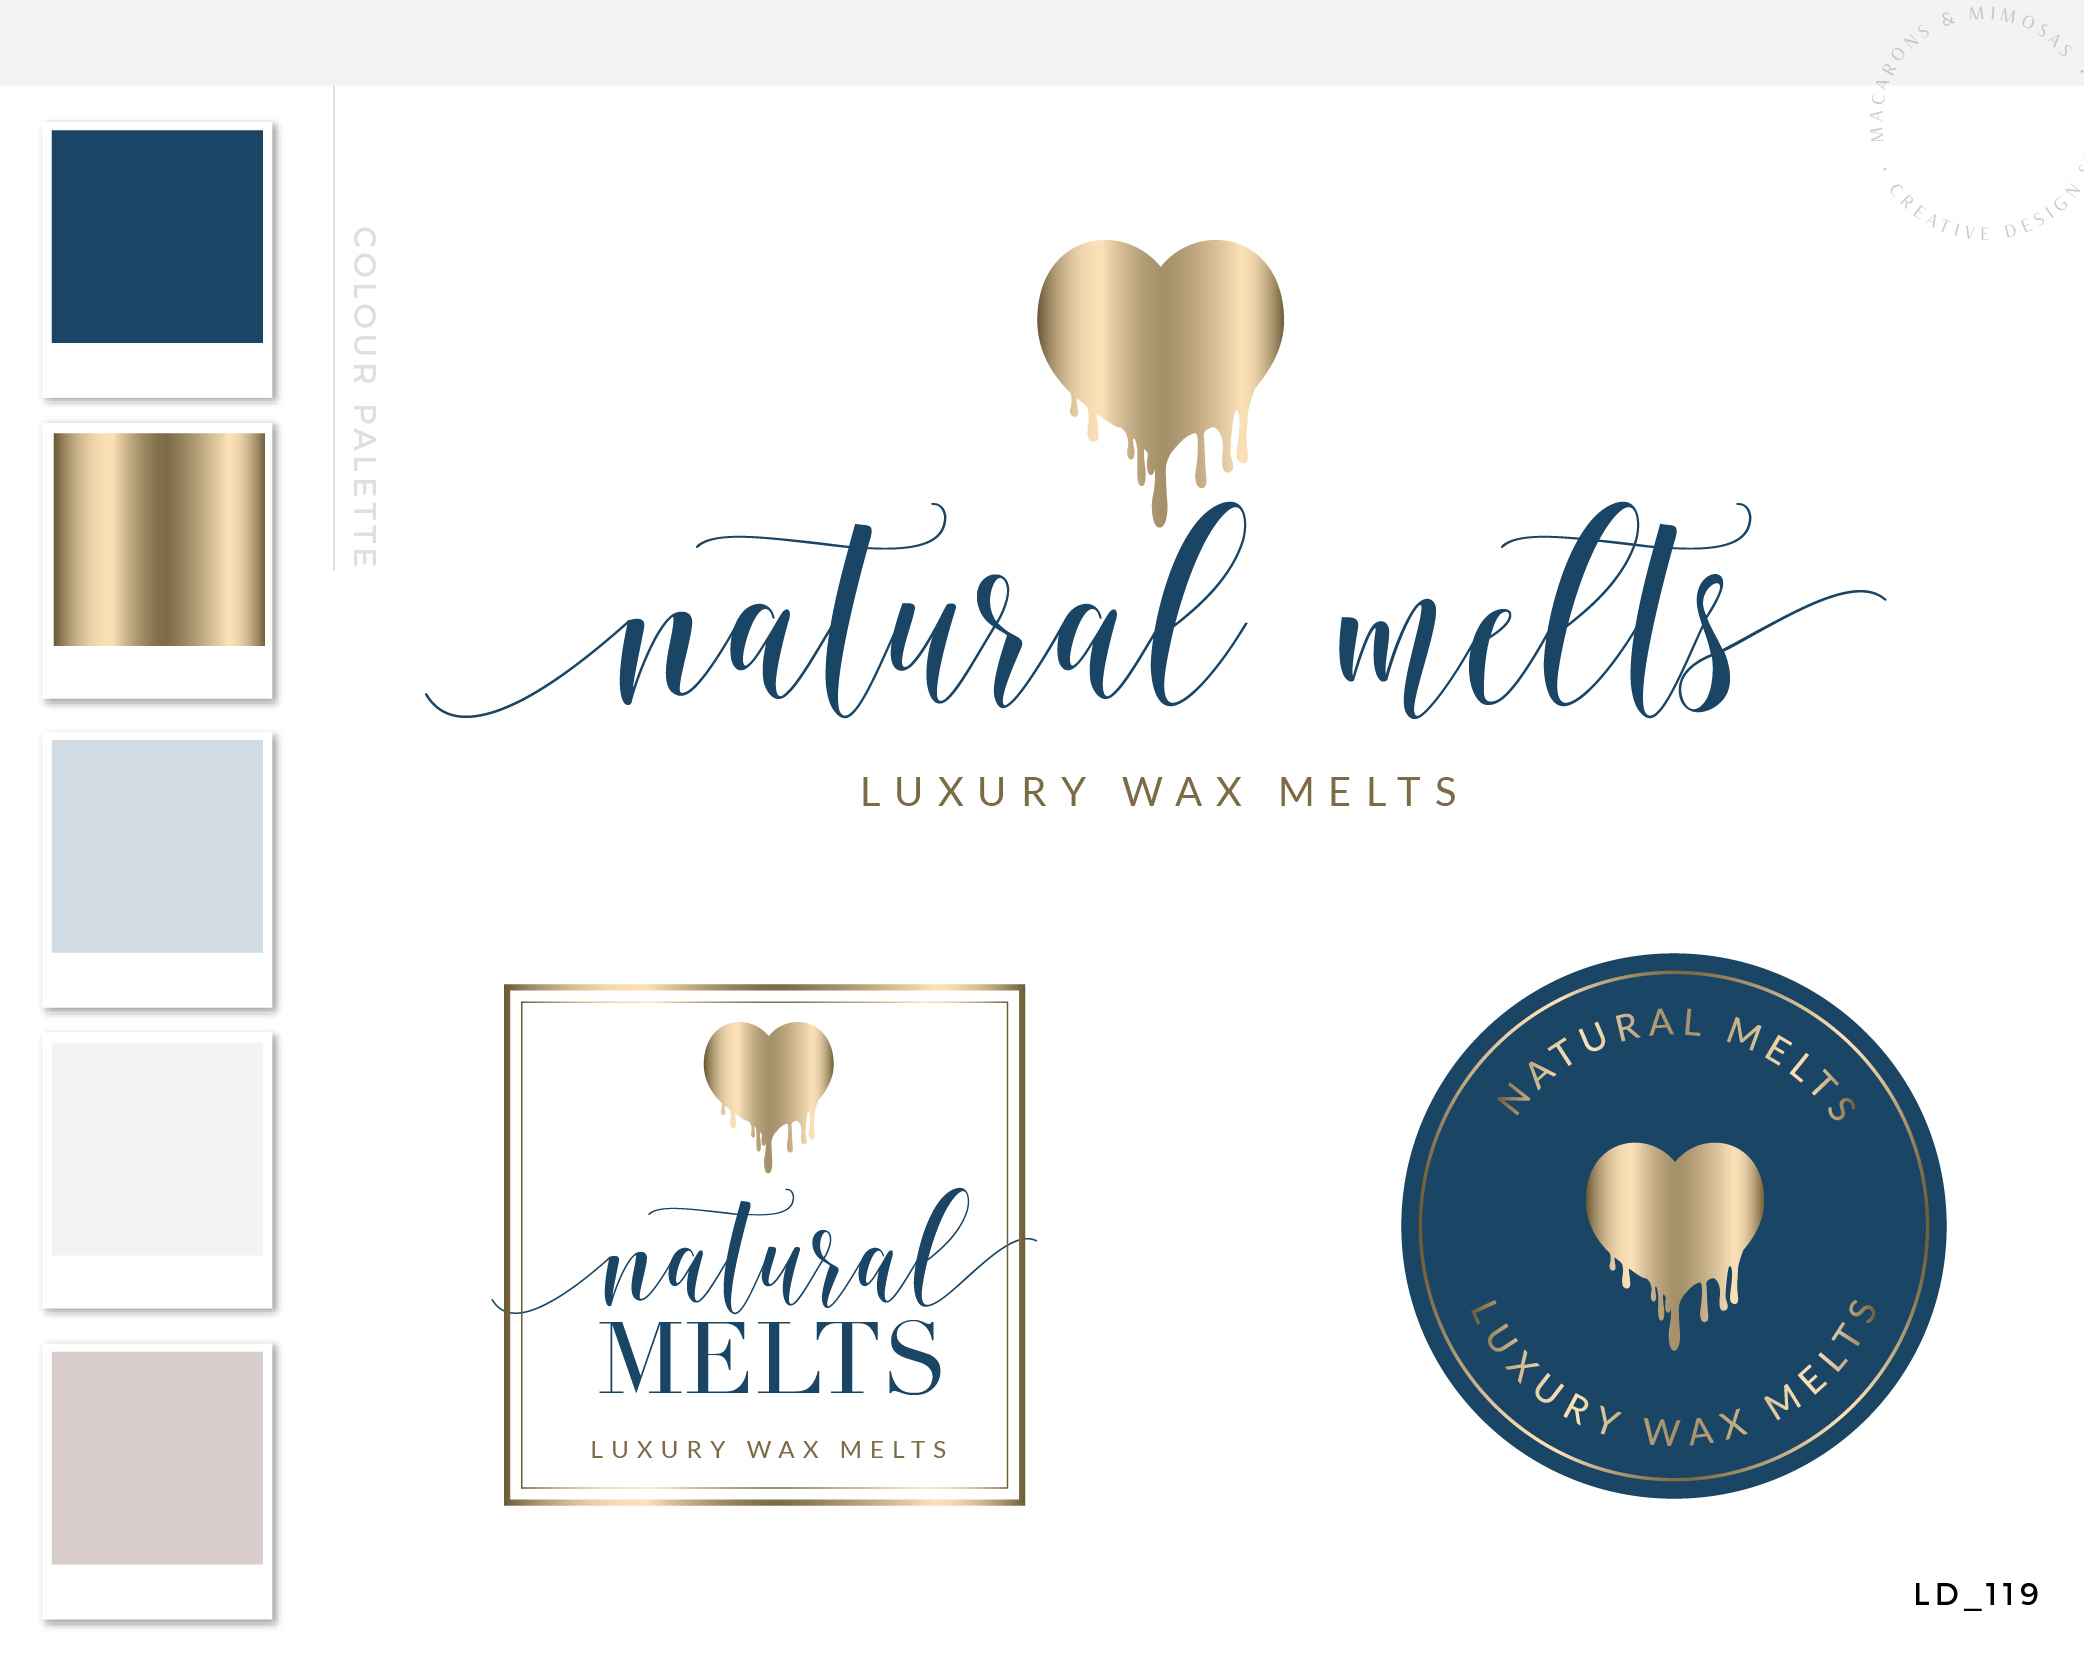 Candle Logo Design, Hand Poured Luxe Wax Brand Design, Dripping heart Wax Melts Label logo, Decor Wick Candle Boutique Logo Branding Package